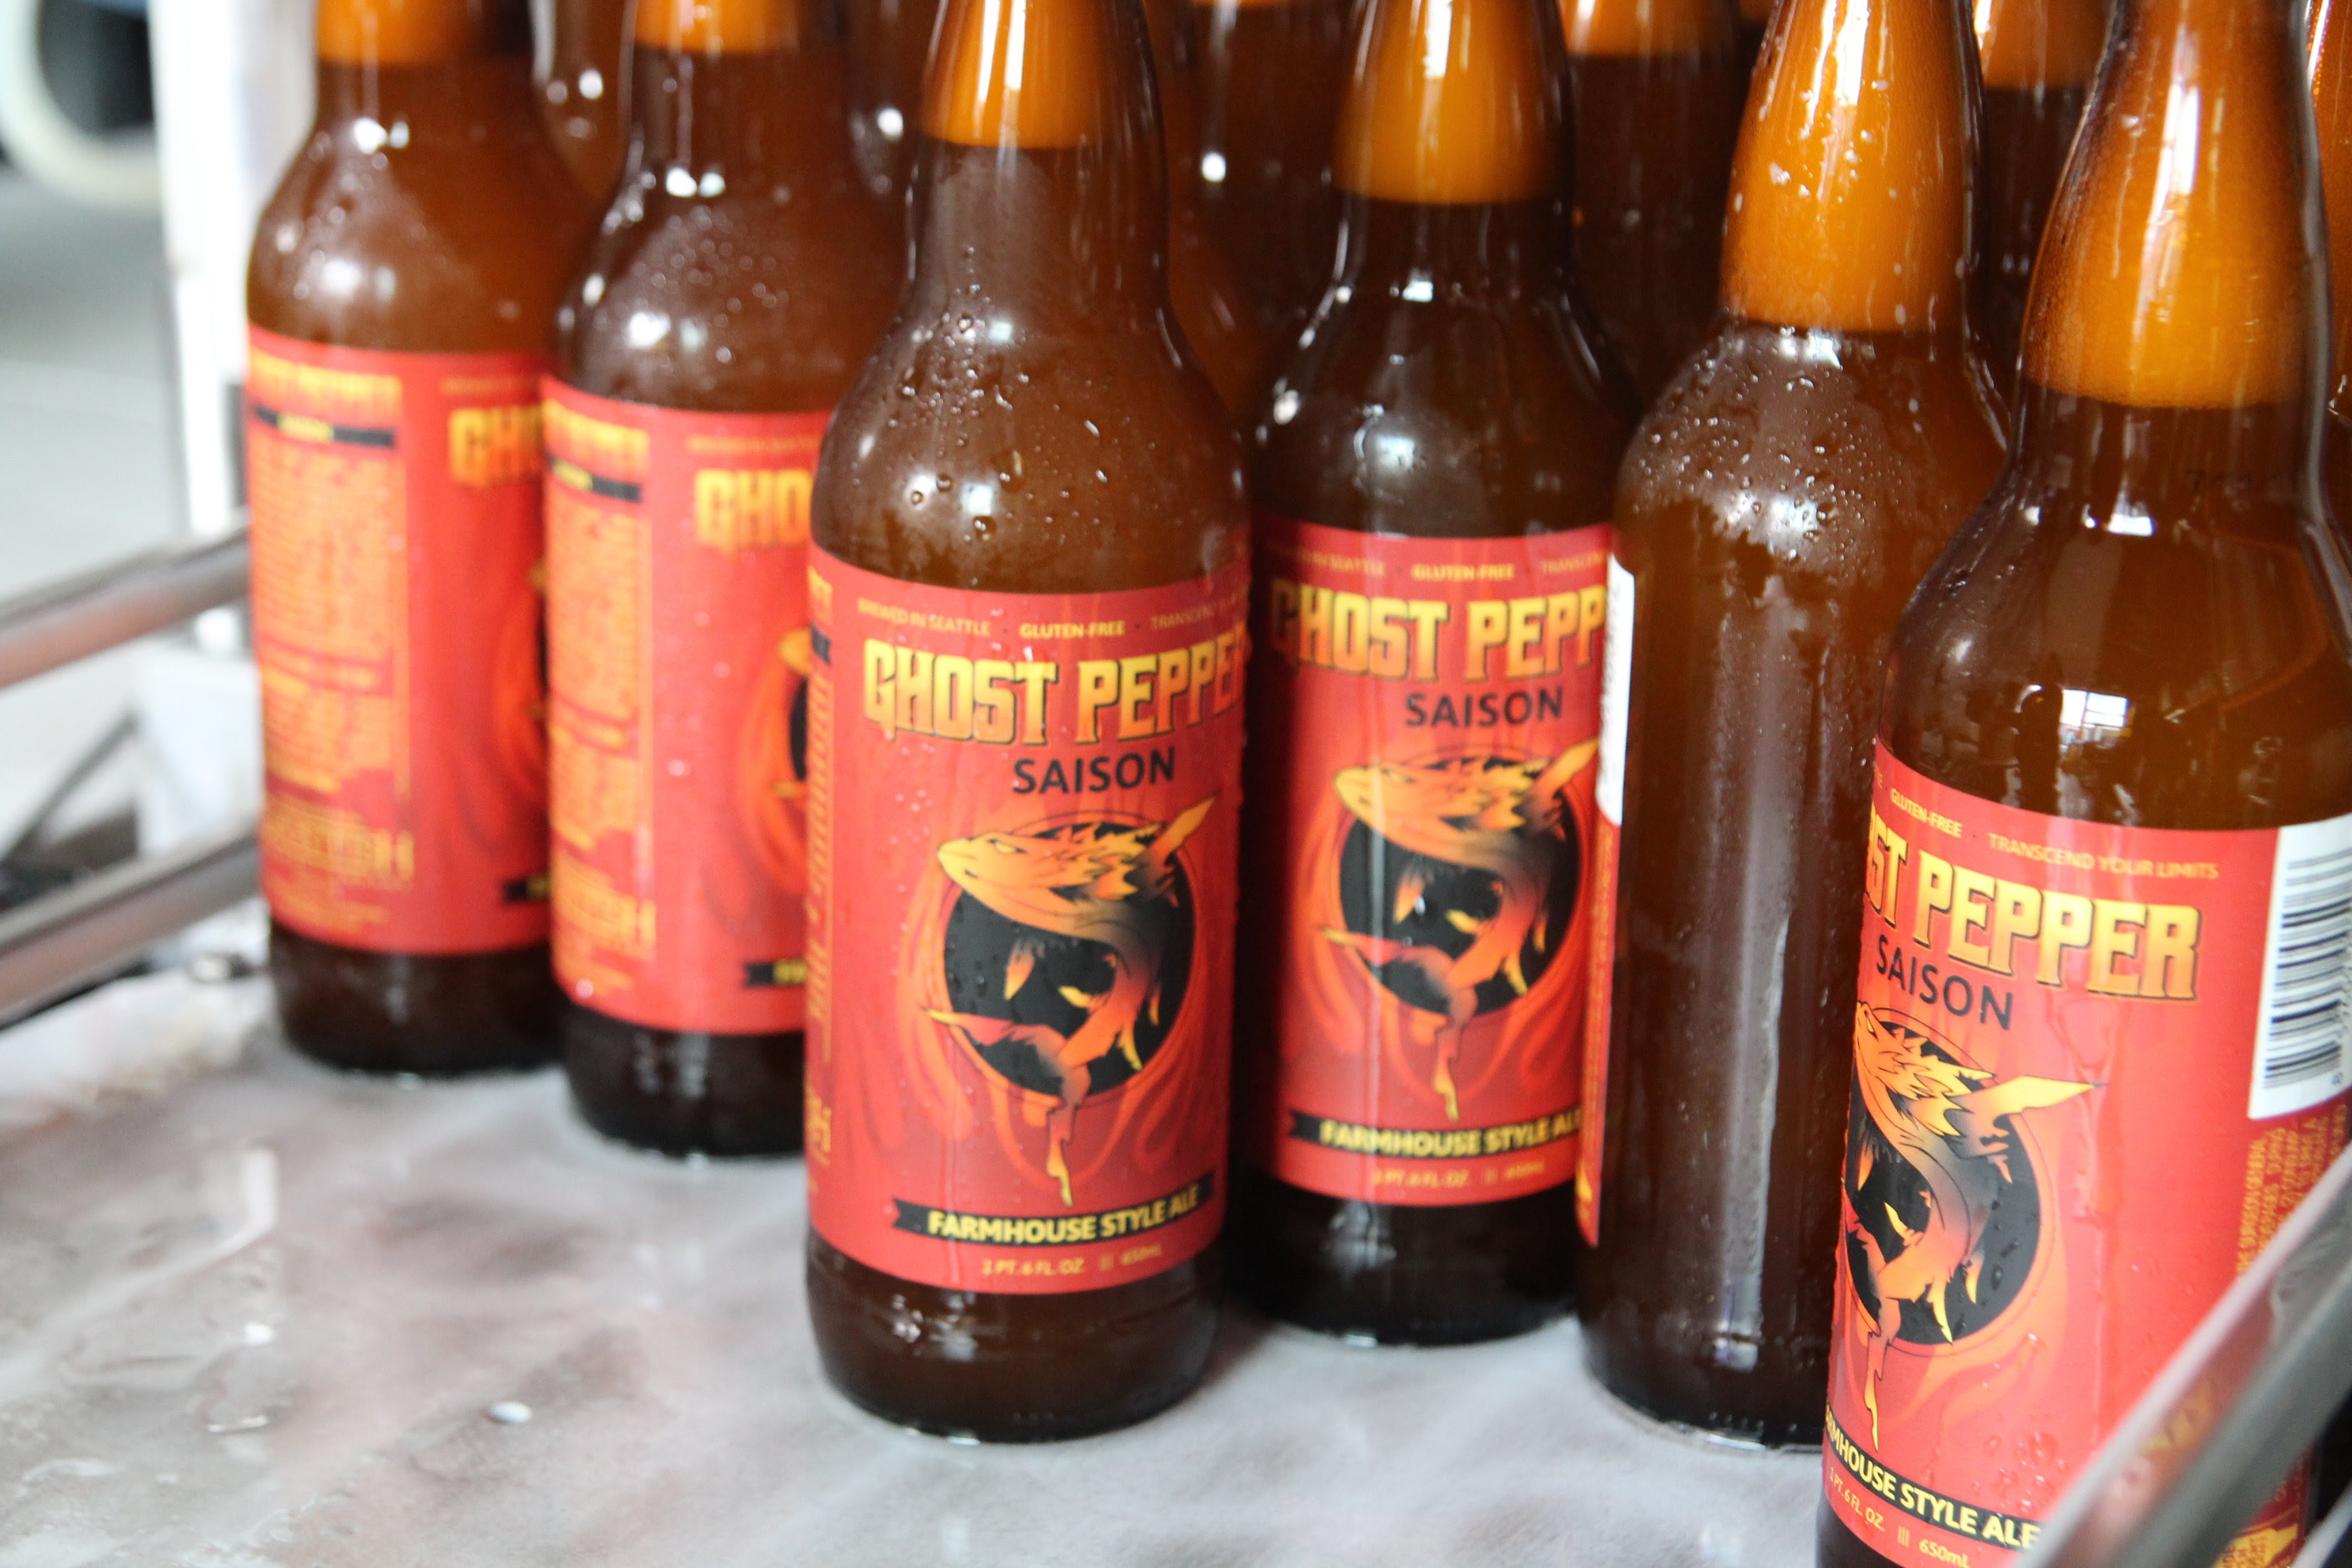 image of Ghost Pepper Saison courtesy of Ghostfish Brewing